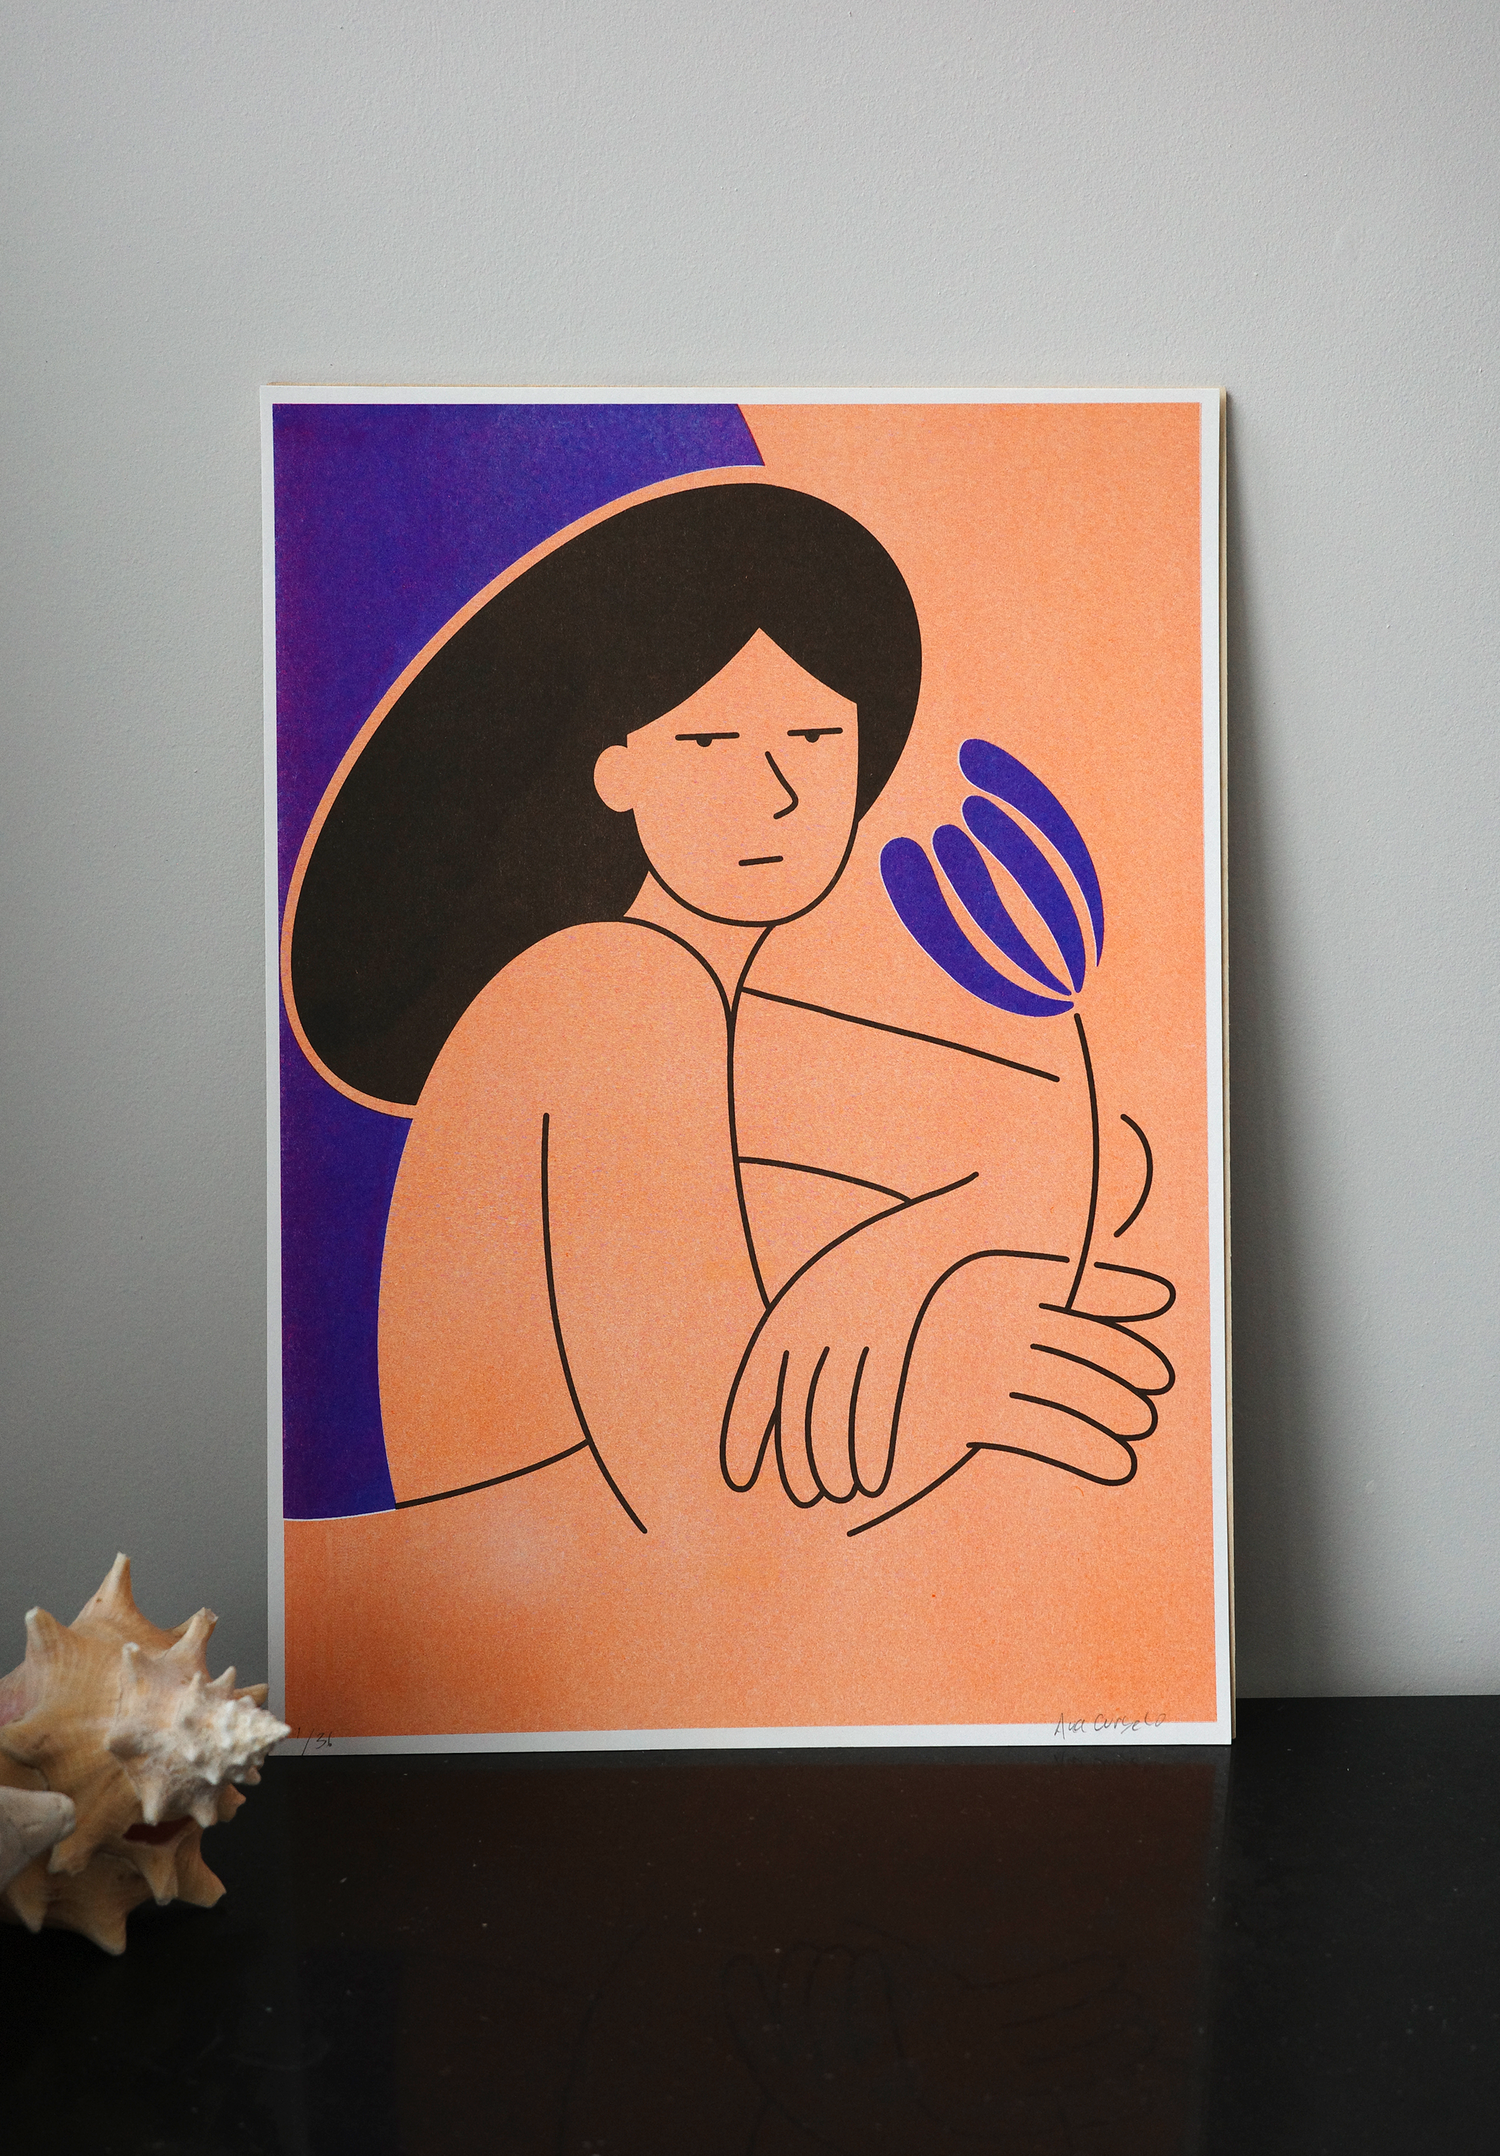 Signed and numbered risograph print by Ana Curbelo